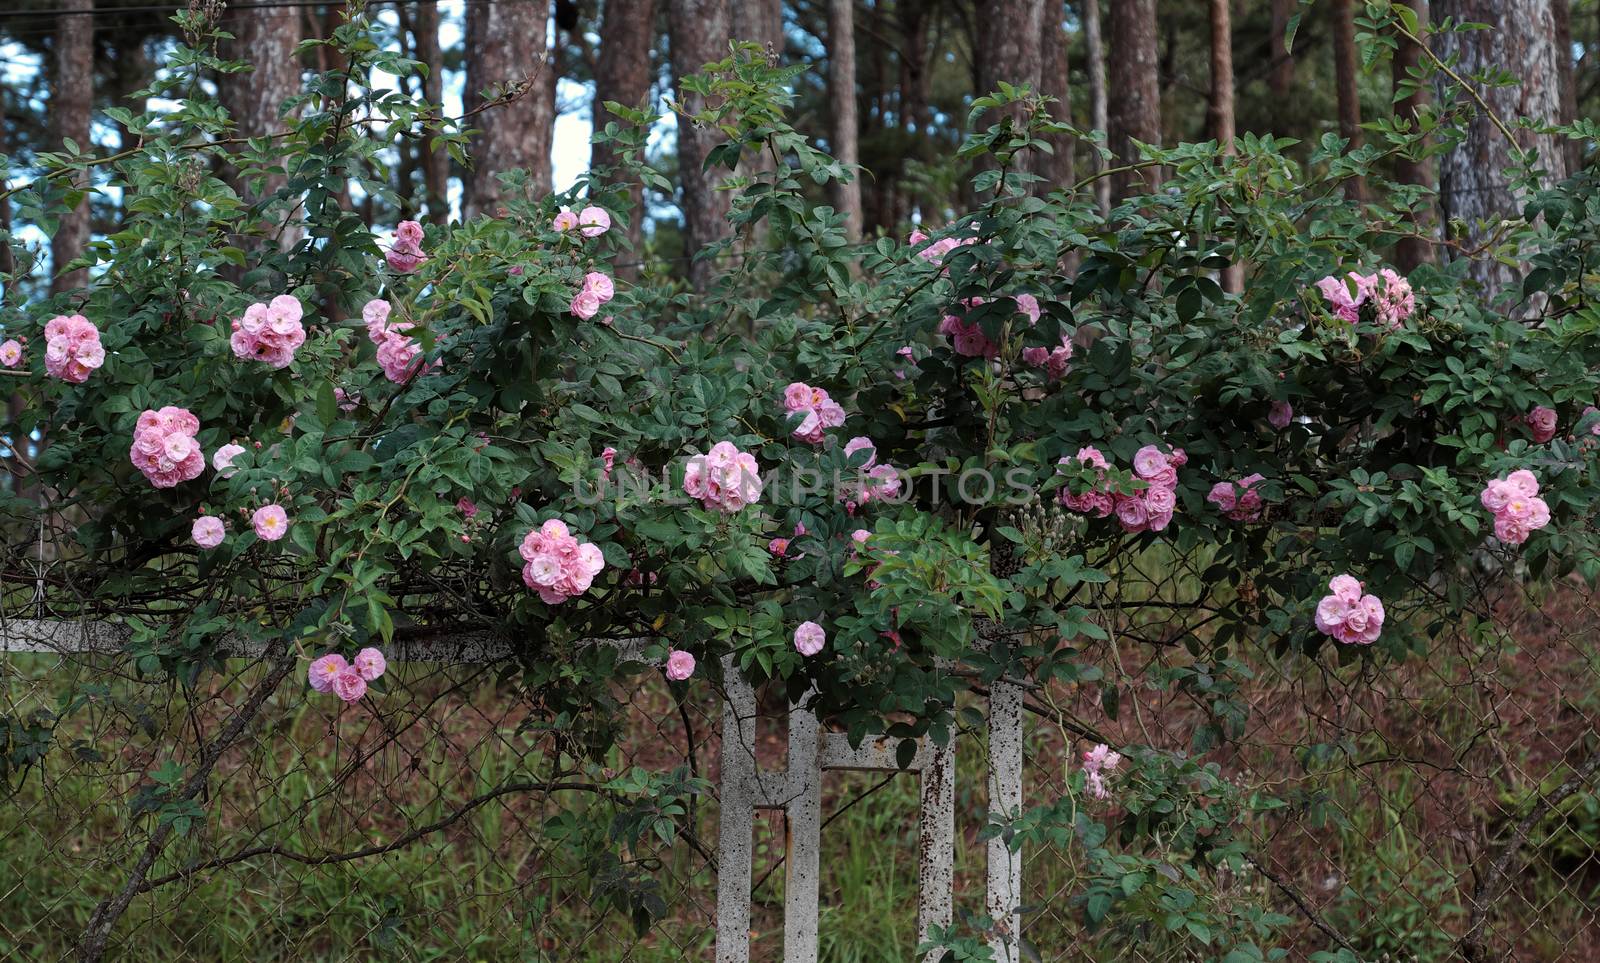 Amazing with bunch of flowers on fence of street in Da lat city, Vietnam, pink rose flower trellis at pine forest make beautiful scene at tourism city of Viet Nam